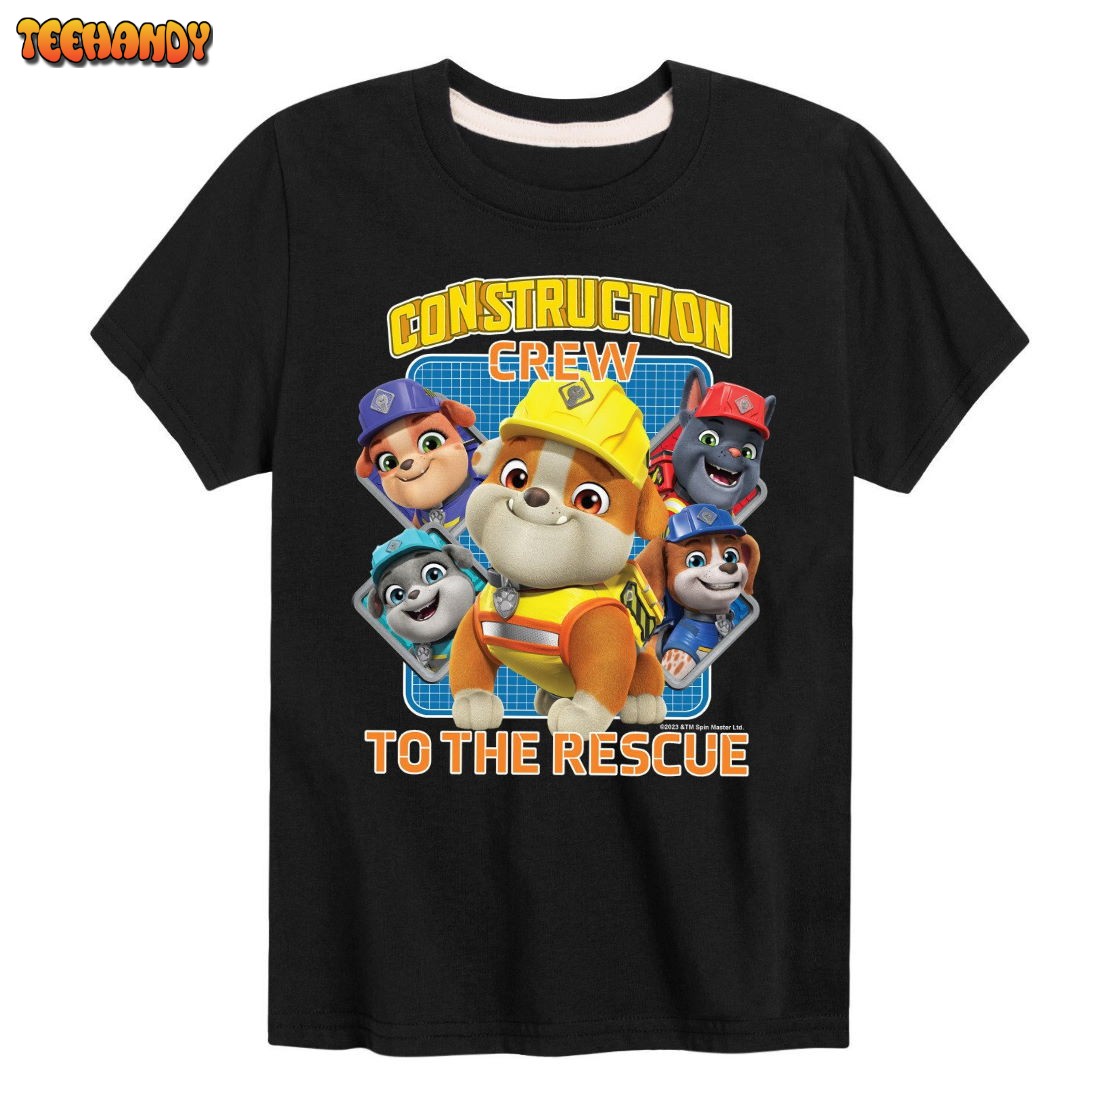 Paw Patrol Rubble & Crew Construction Crew To The Rescue Kid's T Shirt